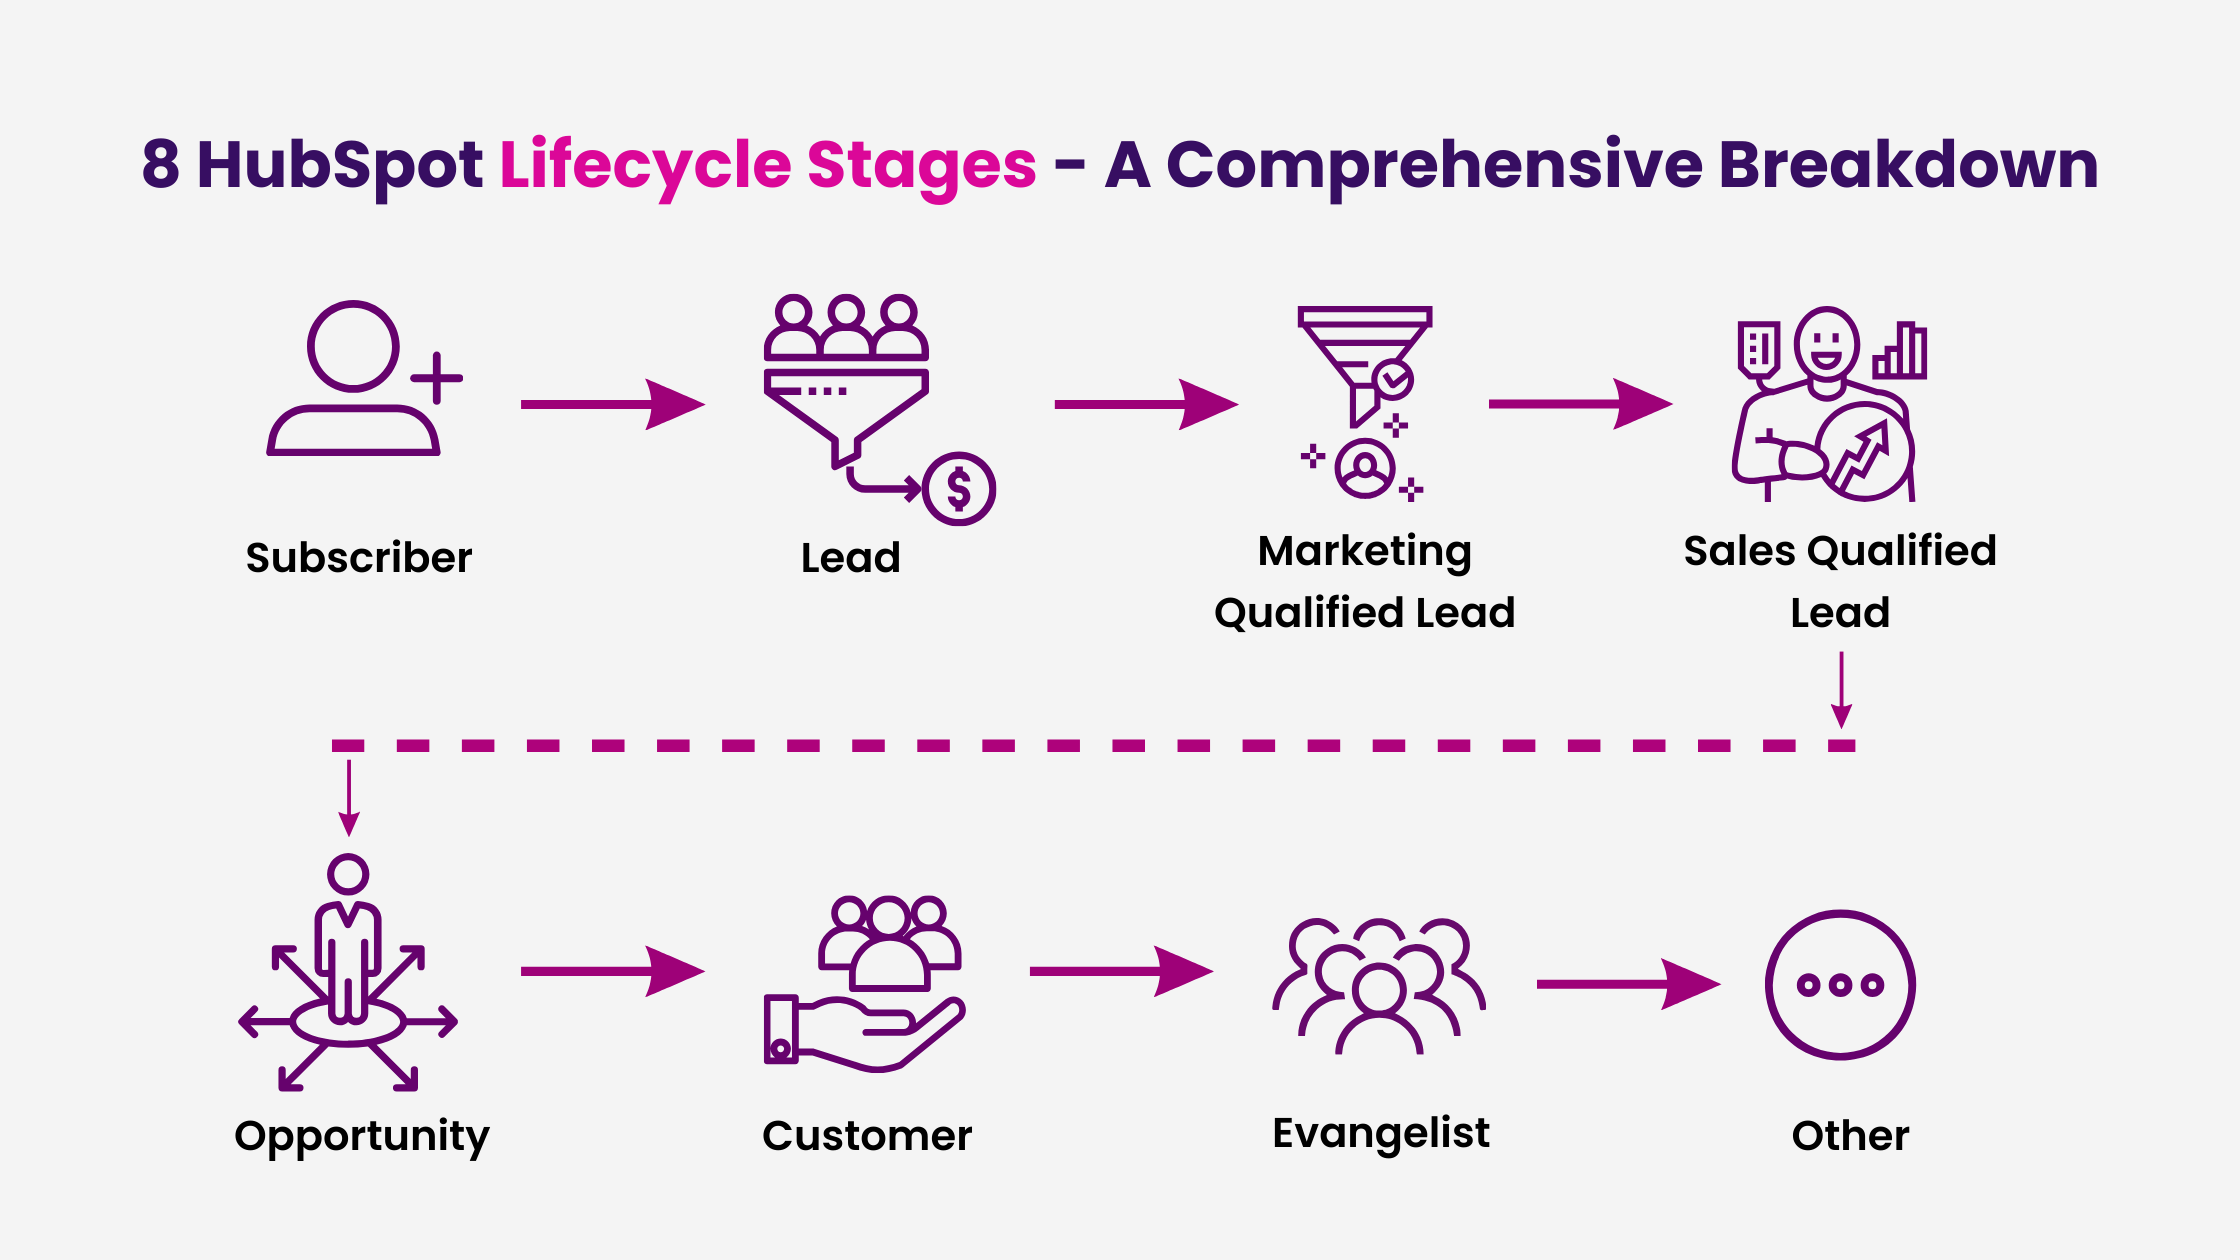 8 HubSpot Lifecycle Stages - A Comprehensive Breakdown